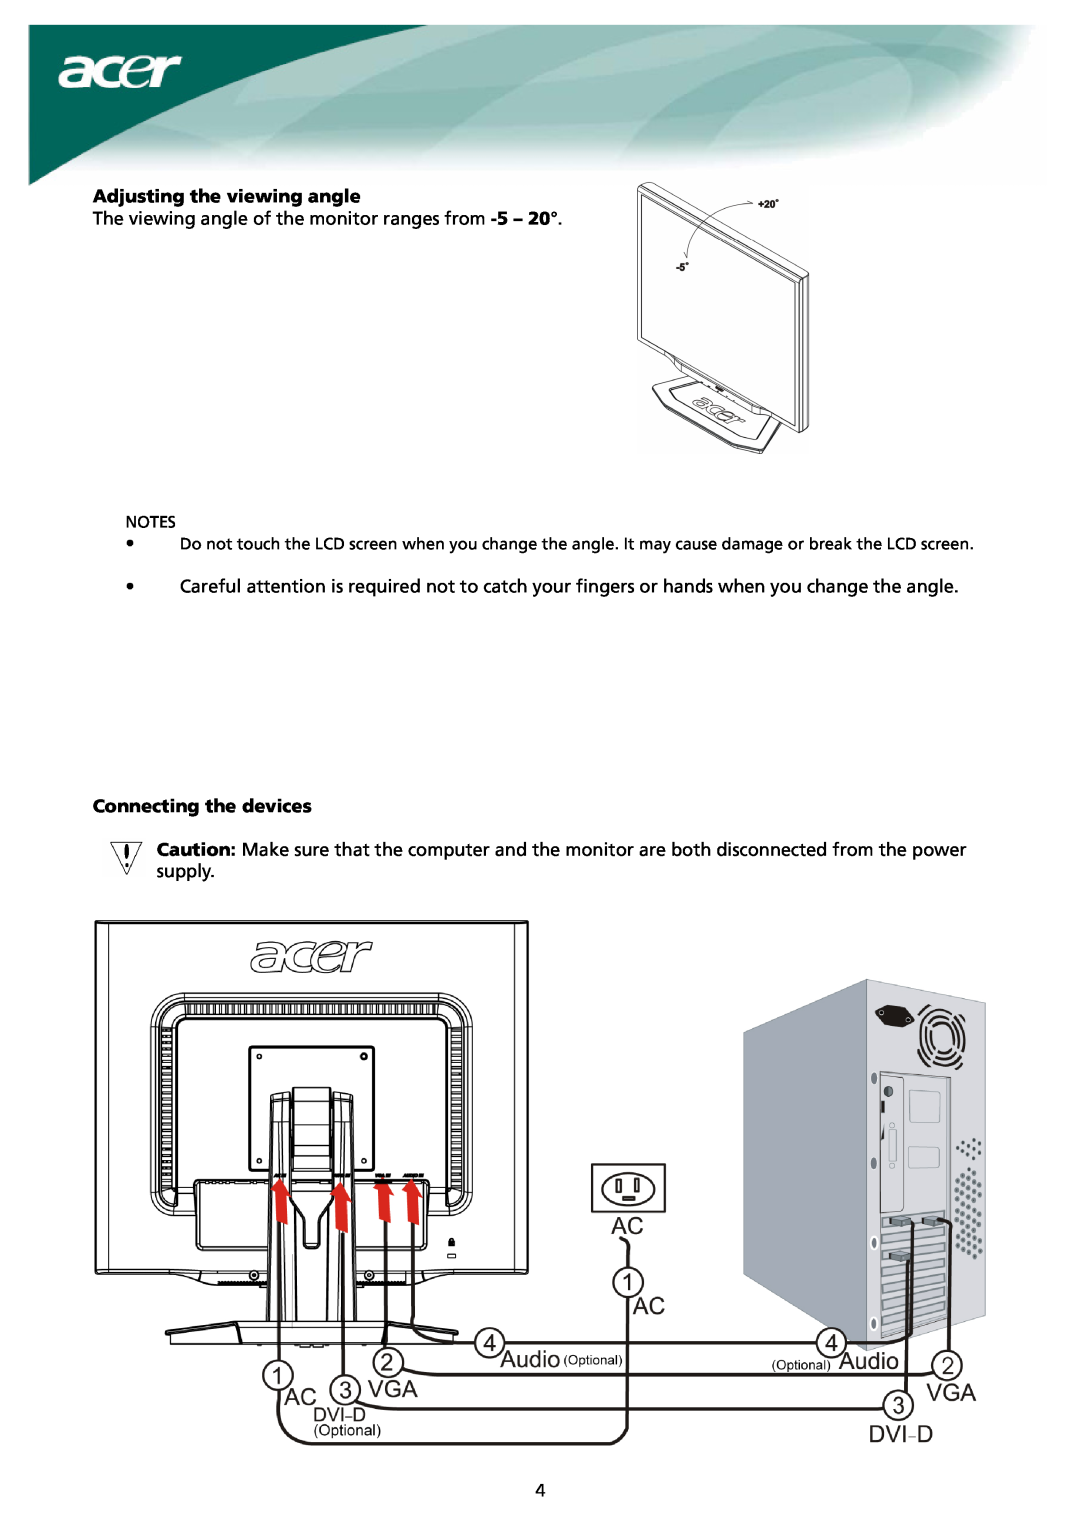 Acer X171 installation instructions Adjusting the viewing angle, Connecting the devices 